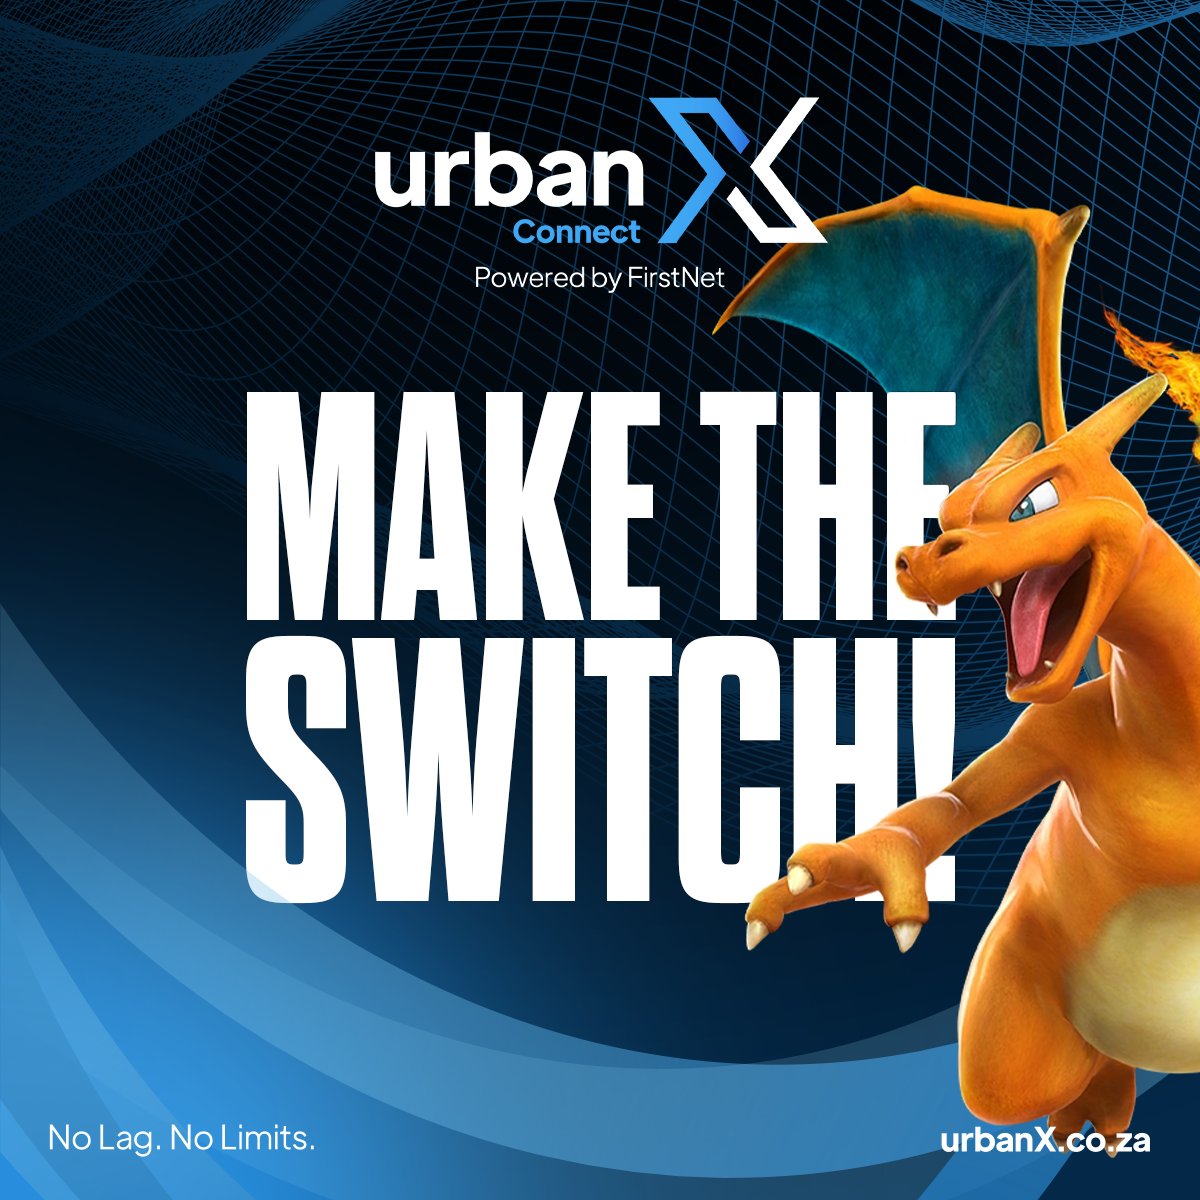 Your winning streak should not be interrupted by a lag spike 🎮 Join the network that is built for gamers like YOU 🔥 We have your back, so focus on your game 💪 Make the switch TODAY 👉 bit.ly/45PWxJu #UrbanX #ForGamers #MakeTheSwitch